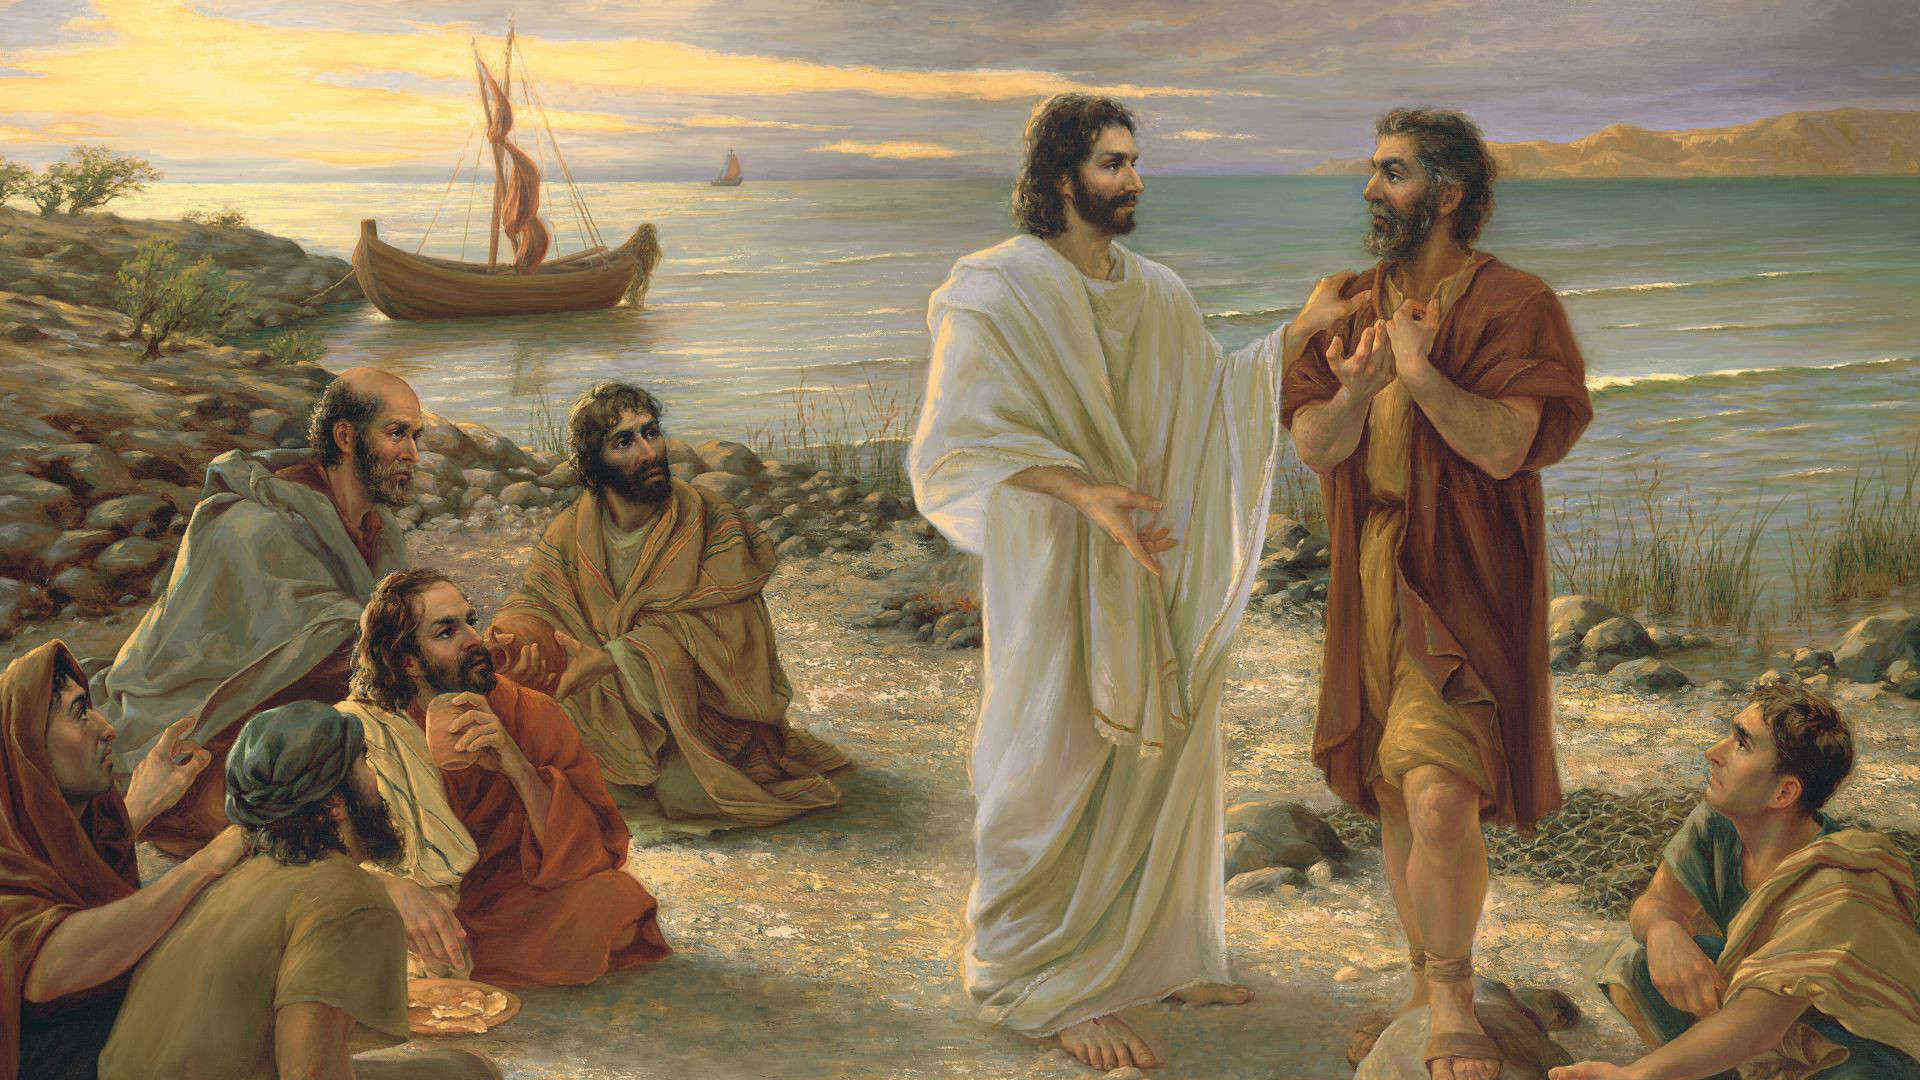 Kamille Corry's painting, "Feed My Sheep," depicting Jesus Christ speaking with Peter on the shores of the Sea of Galilee